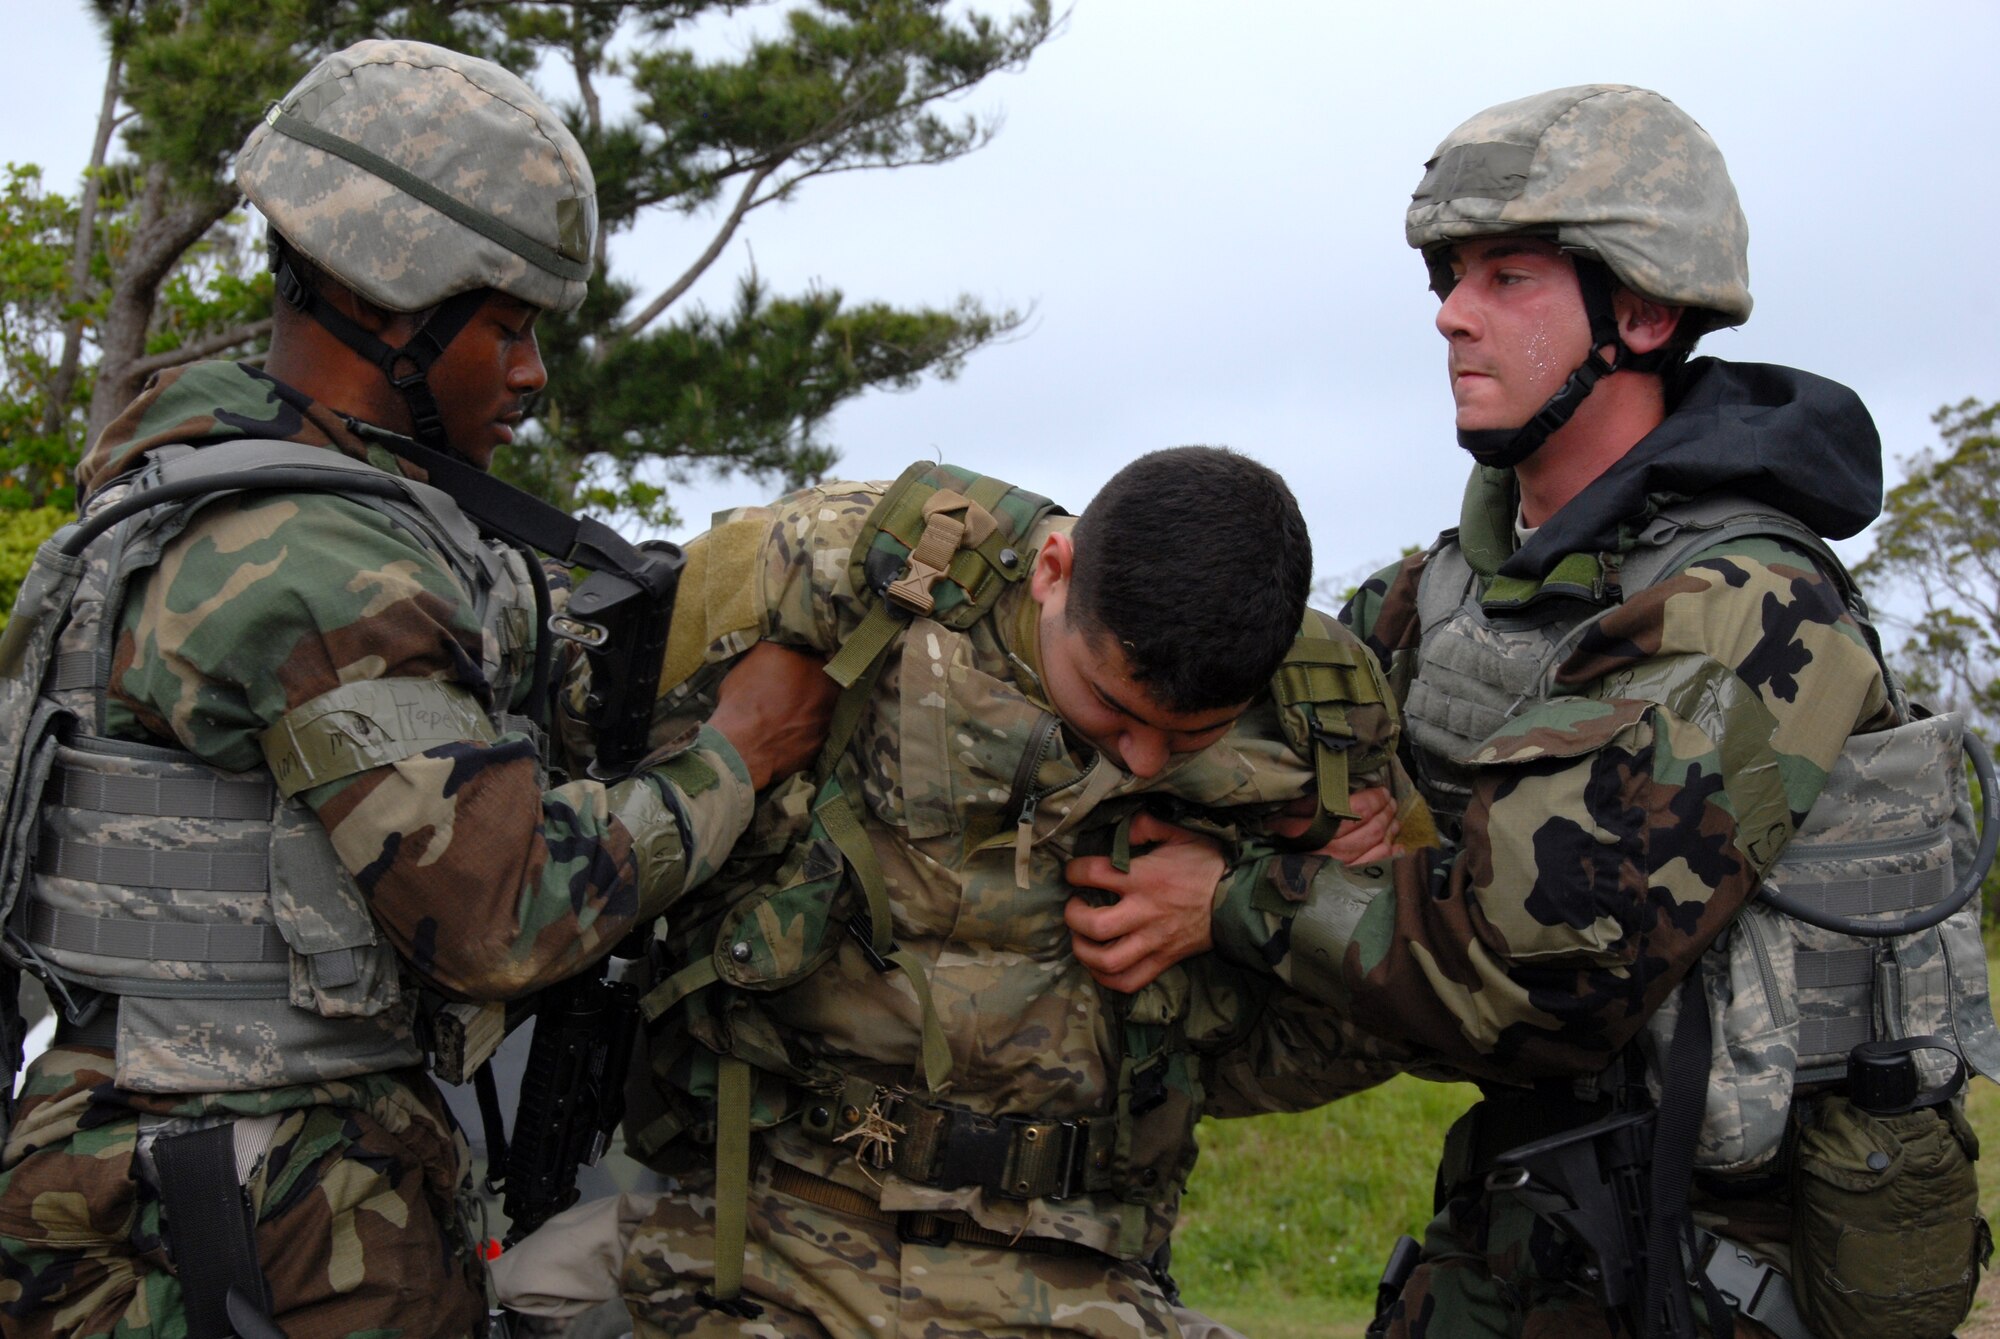 Airman 1st Class Andre Stevenson(left), and Airman 1st Class Andrew Rothstein (right), both 18th Security Forces Squadron members, provide safety and recovery to Senior Airman Spenser Estrada at Area 1 against opposition forces during Beverly High 10-02 at Kadena Air Base, Japan, March 25. The 18th Wing is participating in a Local Operational Readiness Exercise March 22026 to test the readiness of Kadena Airmen. (U.S. Air Force photo/Junko Kinjo)                   